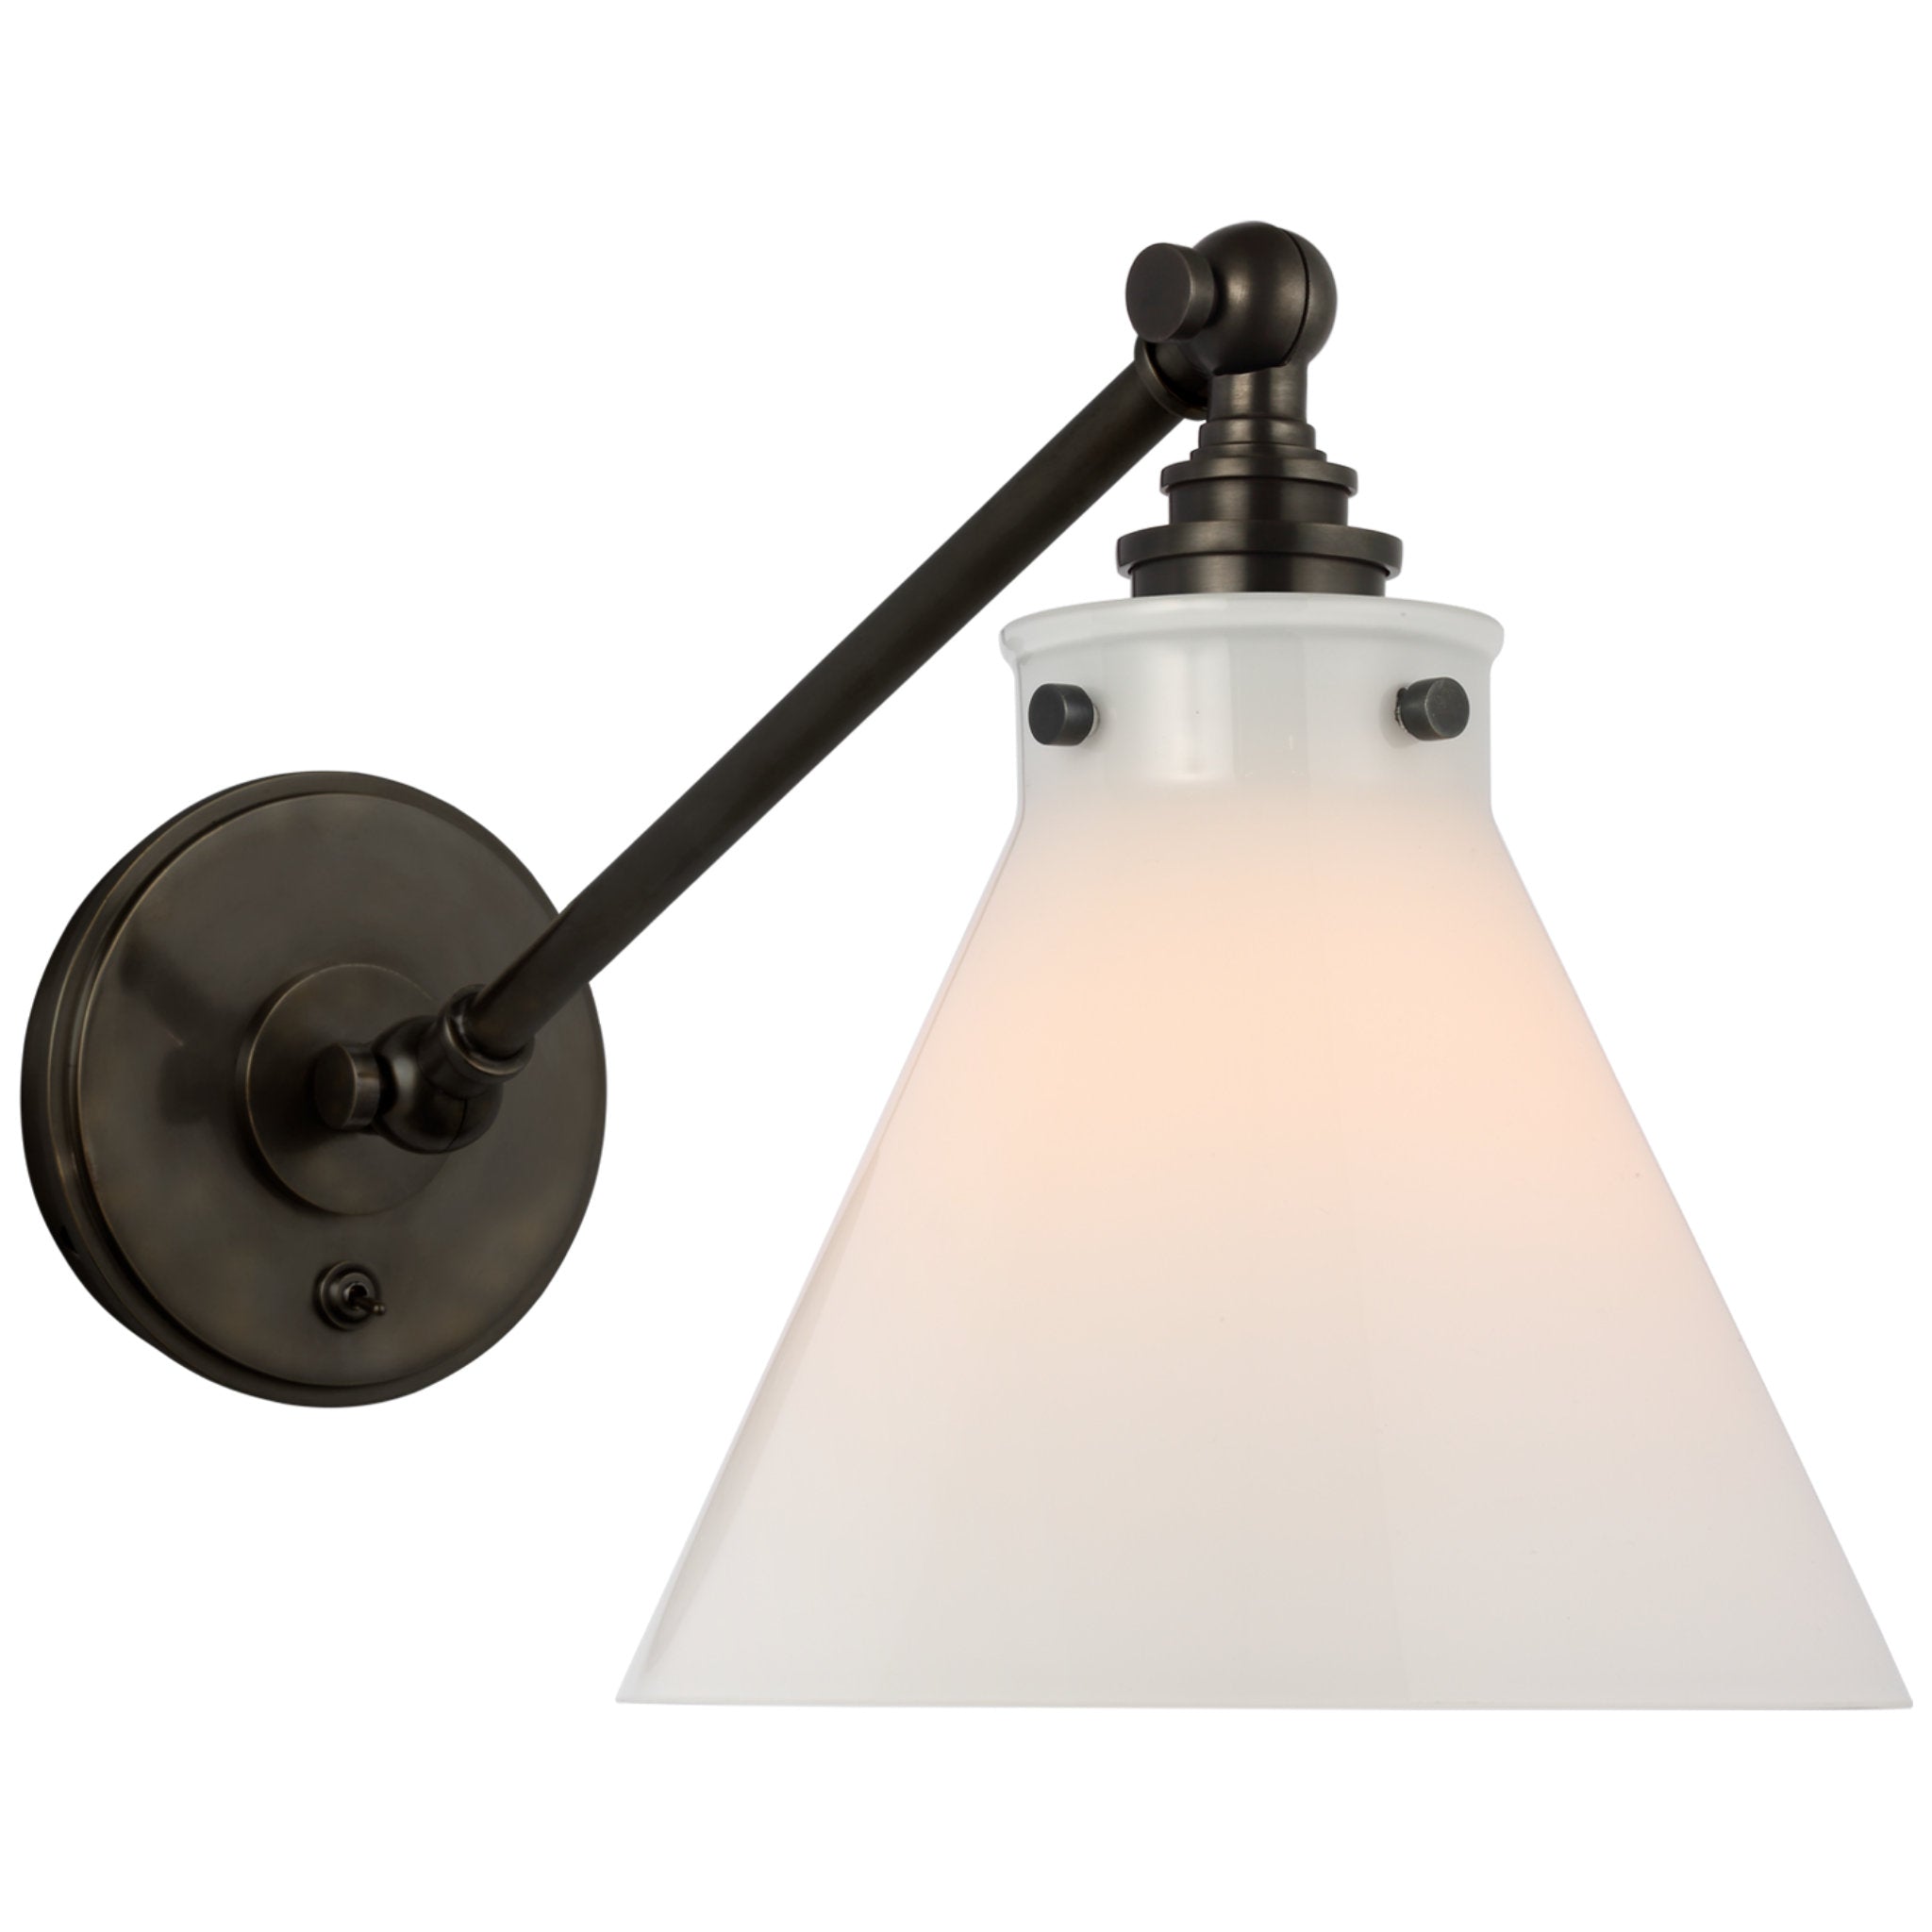 Chapman & Myers Parkington Single Library Wall Light in Bronze with White  Glass